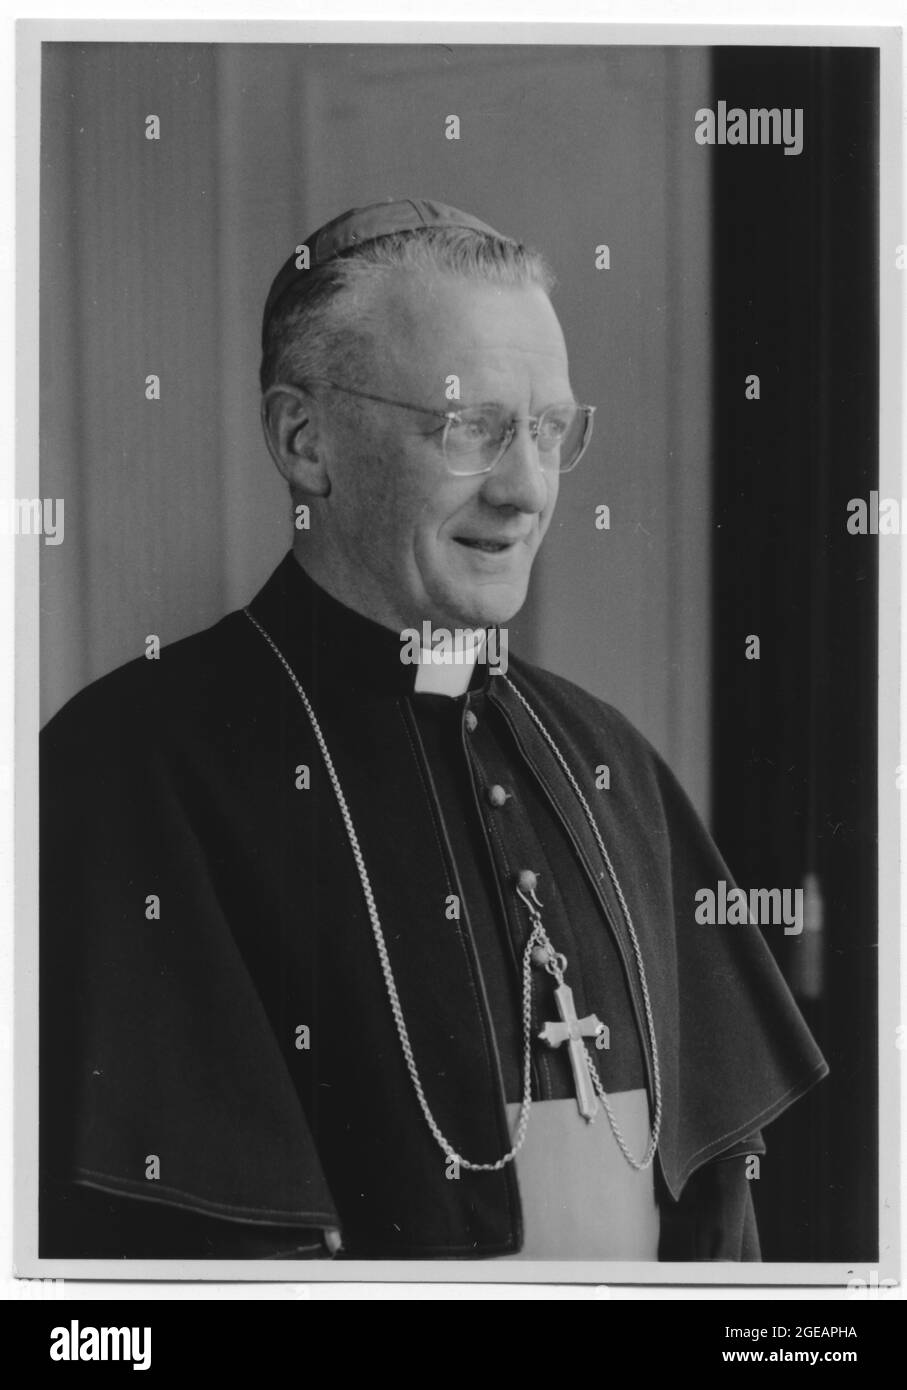 Priest of English roman catholic church wearing skullcap and pectoral cross. Black and white photography Stock Photo